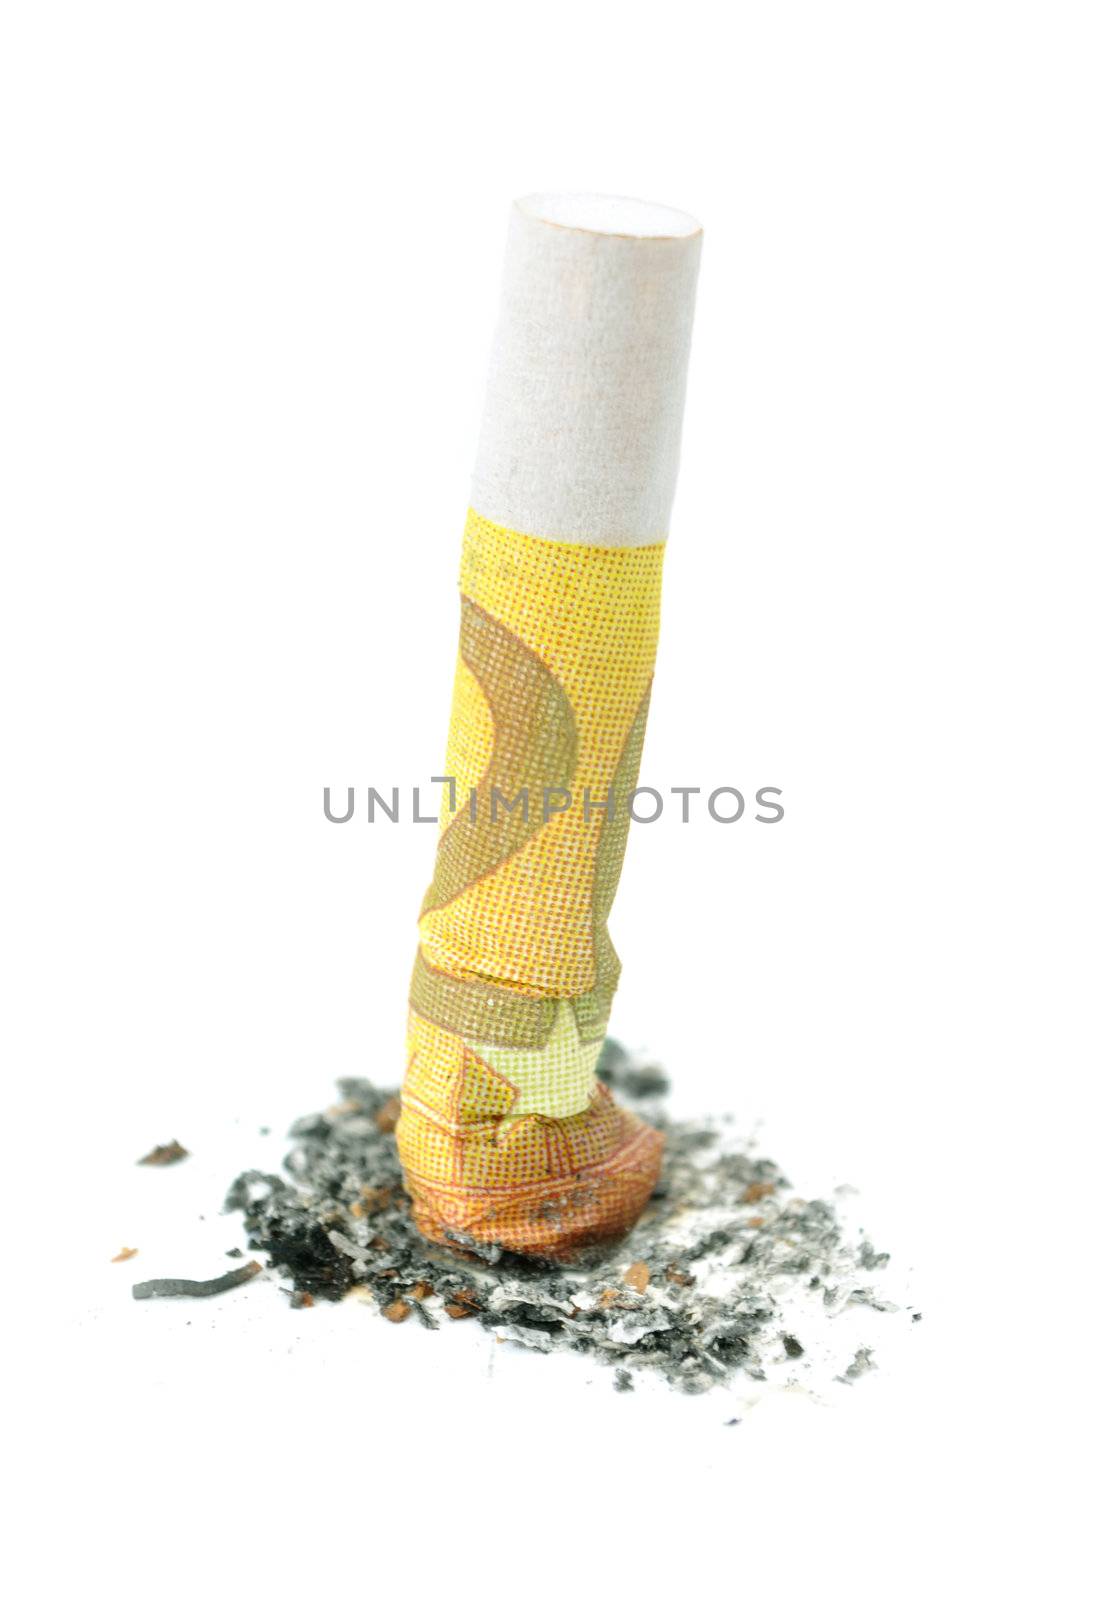 Extinguished cigarette made with a 200 euro banknote